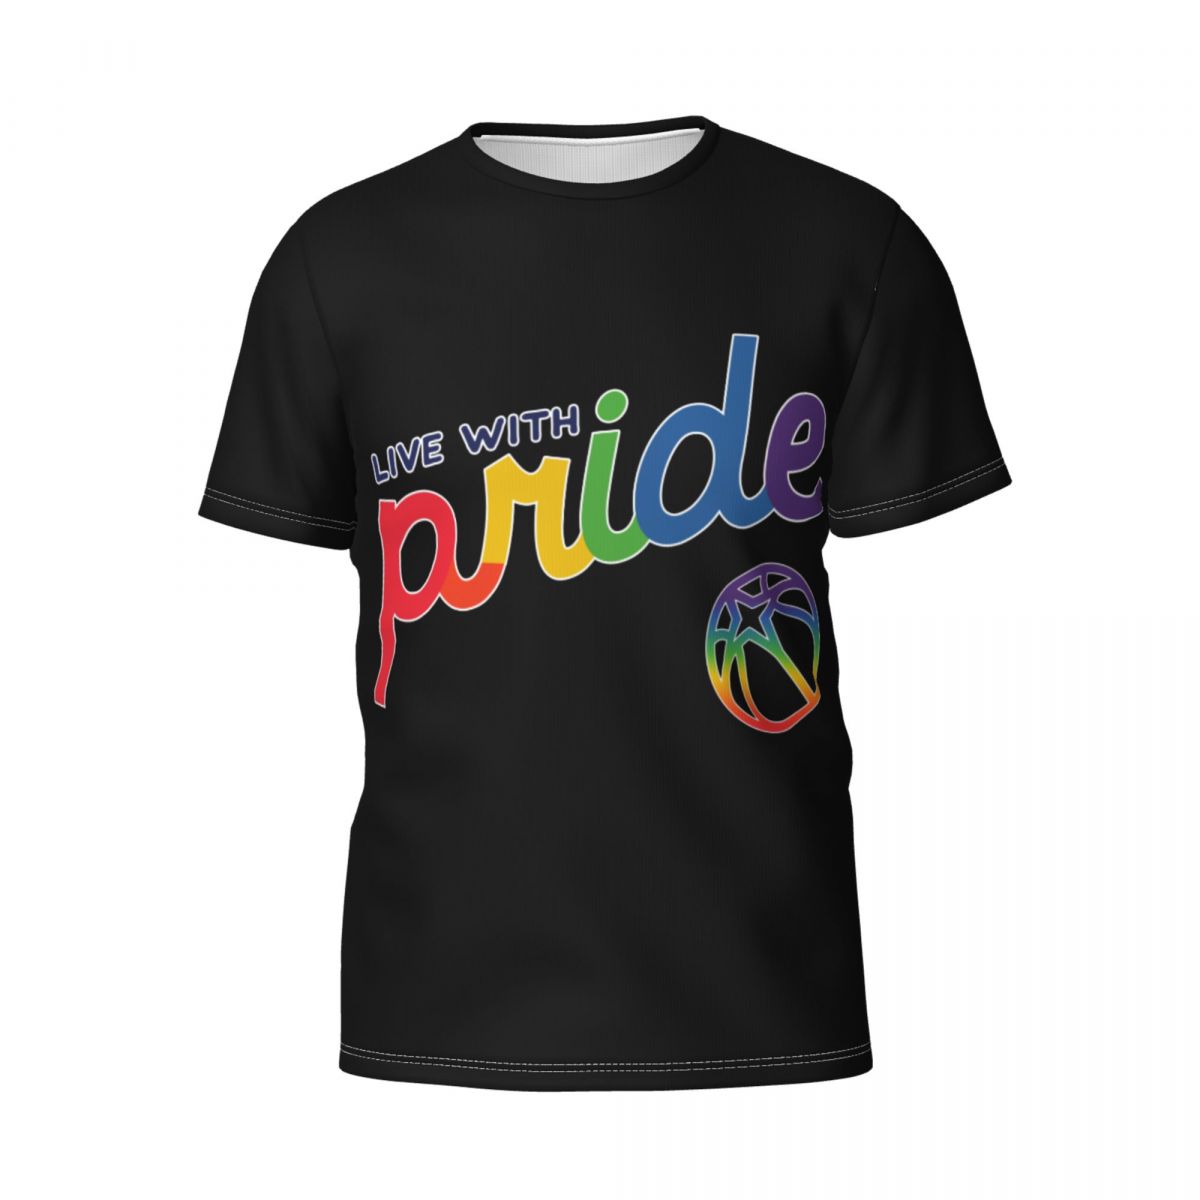 Minnesota Timberwolves Live With Pride Printed Men's T-Shirt